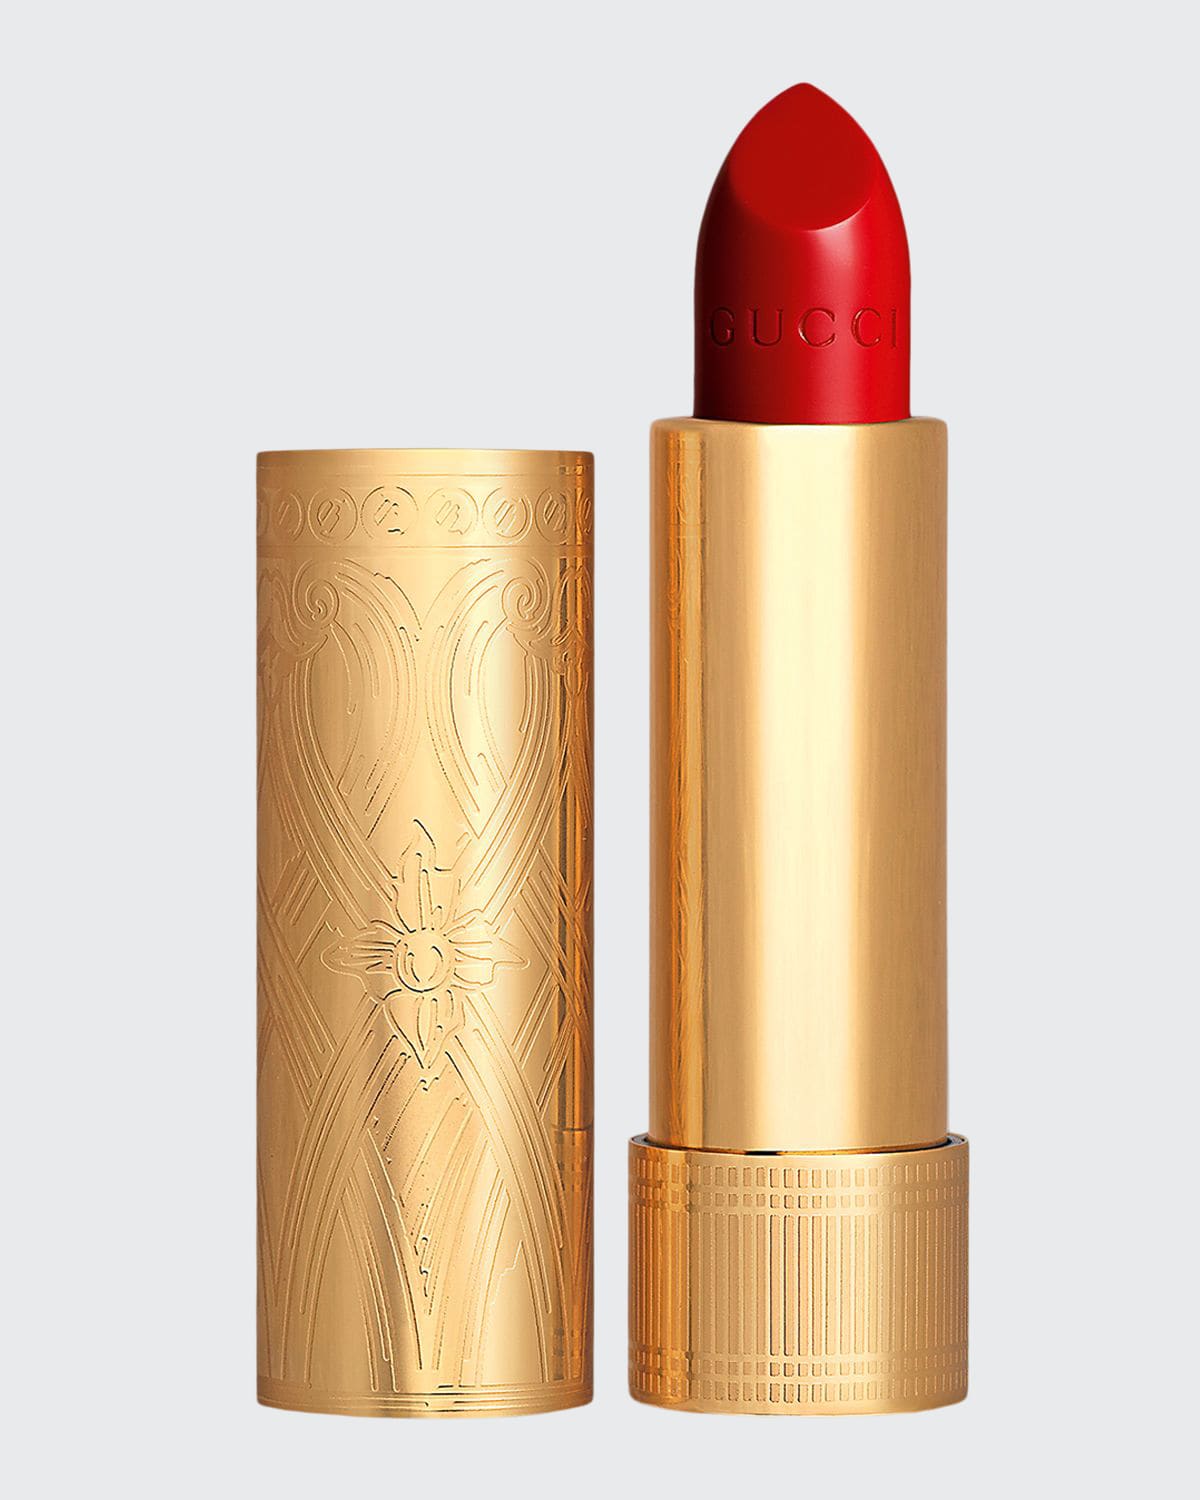 Gucci Rouge &#224 L&#232vres Satin Lipstick In 502 Eadie Scarlet